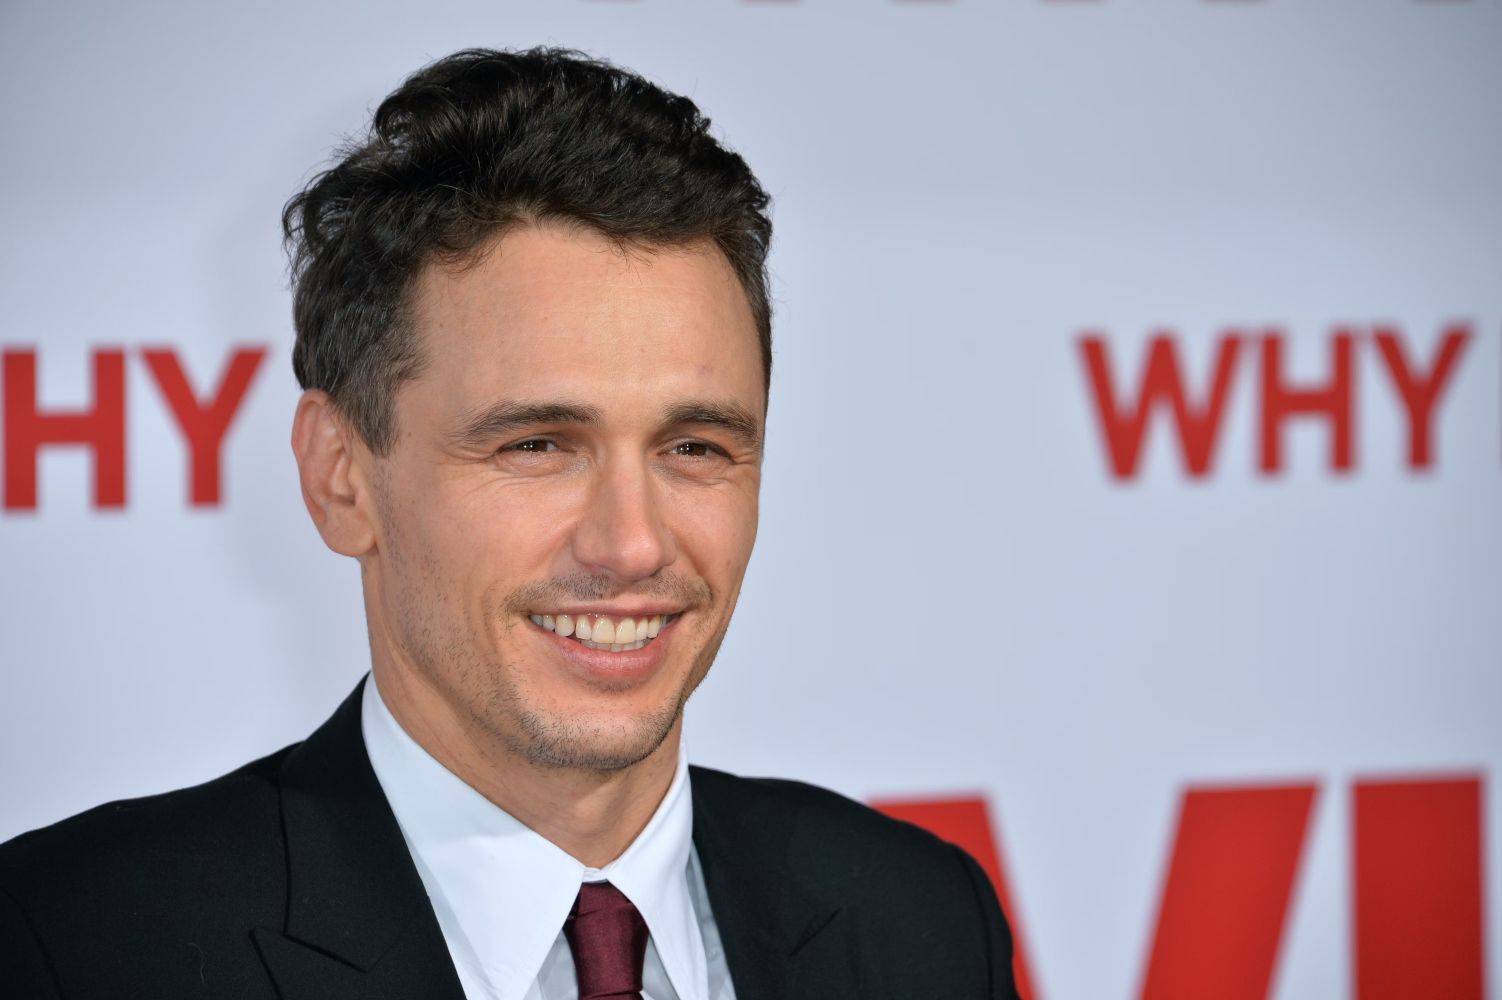 James Franco at the world premiere of Why Him at the Regency Bruin Theatre, Westwood